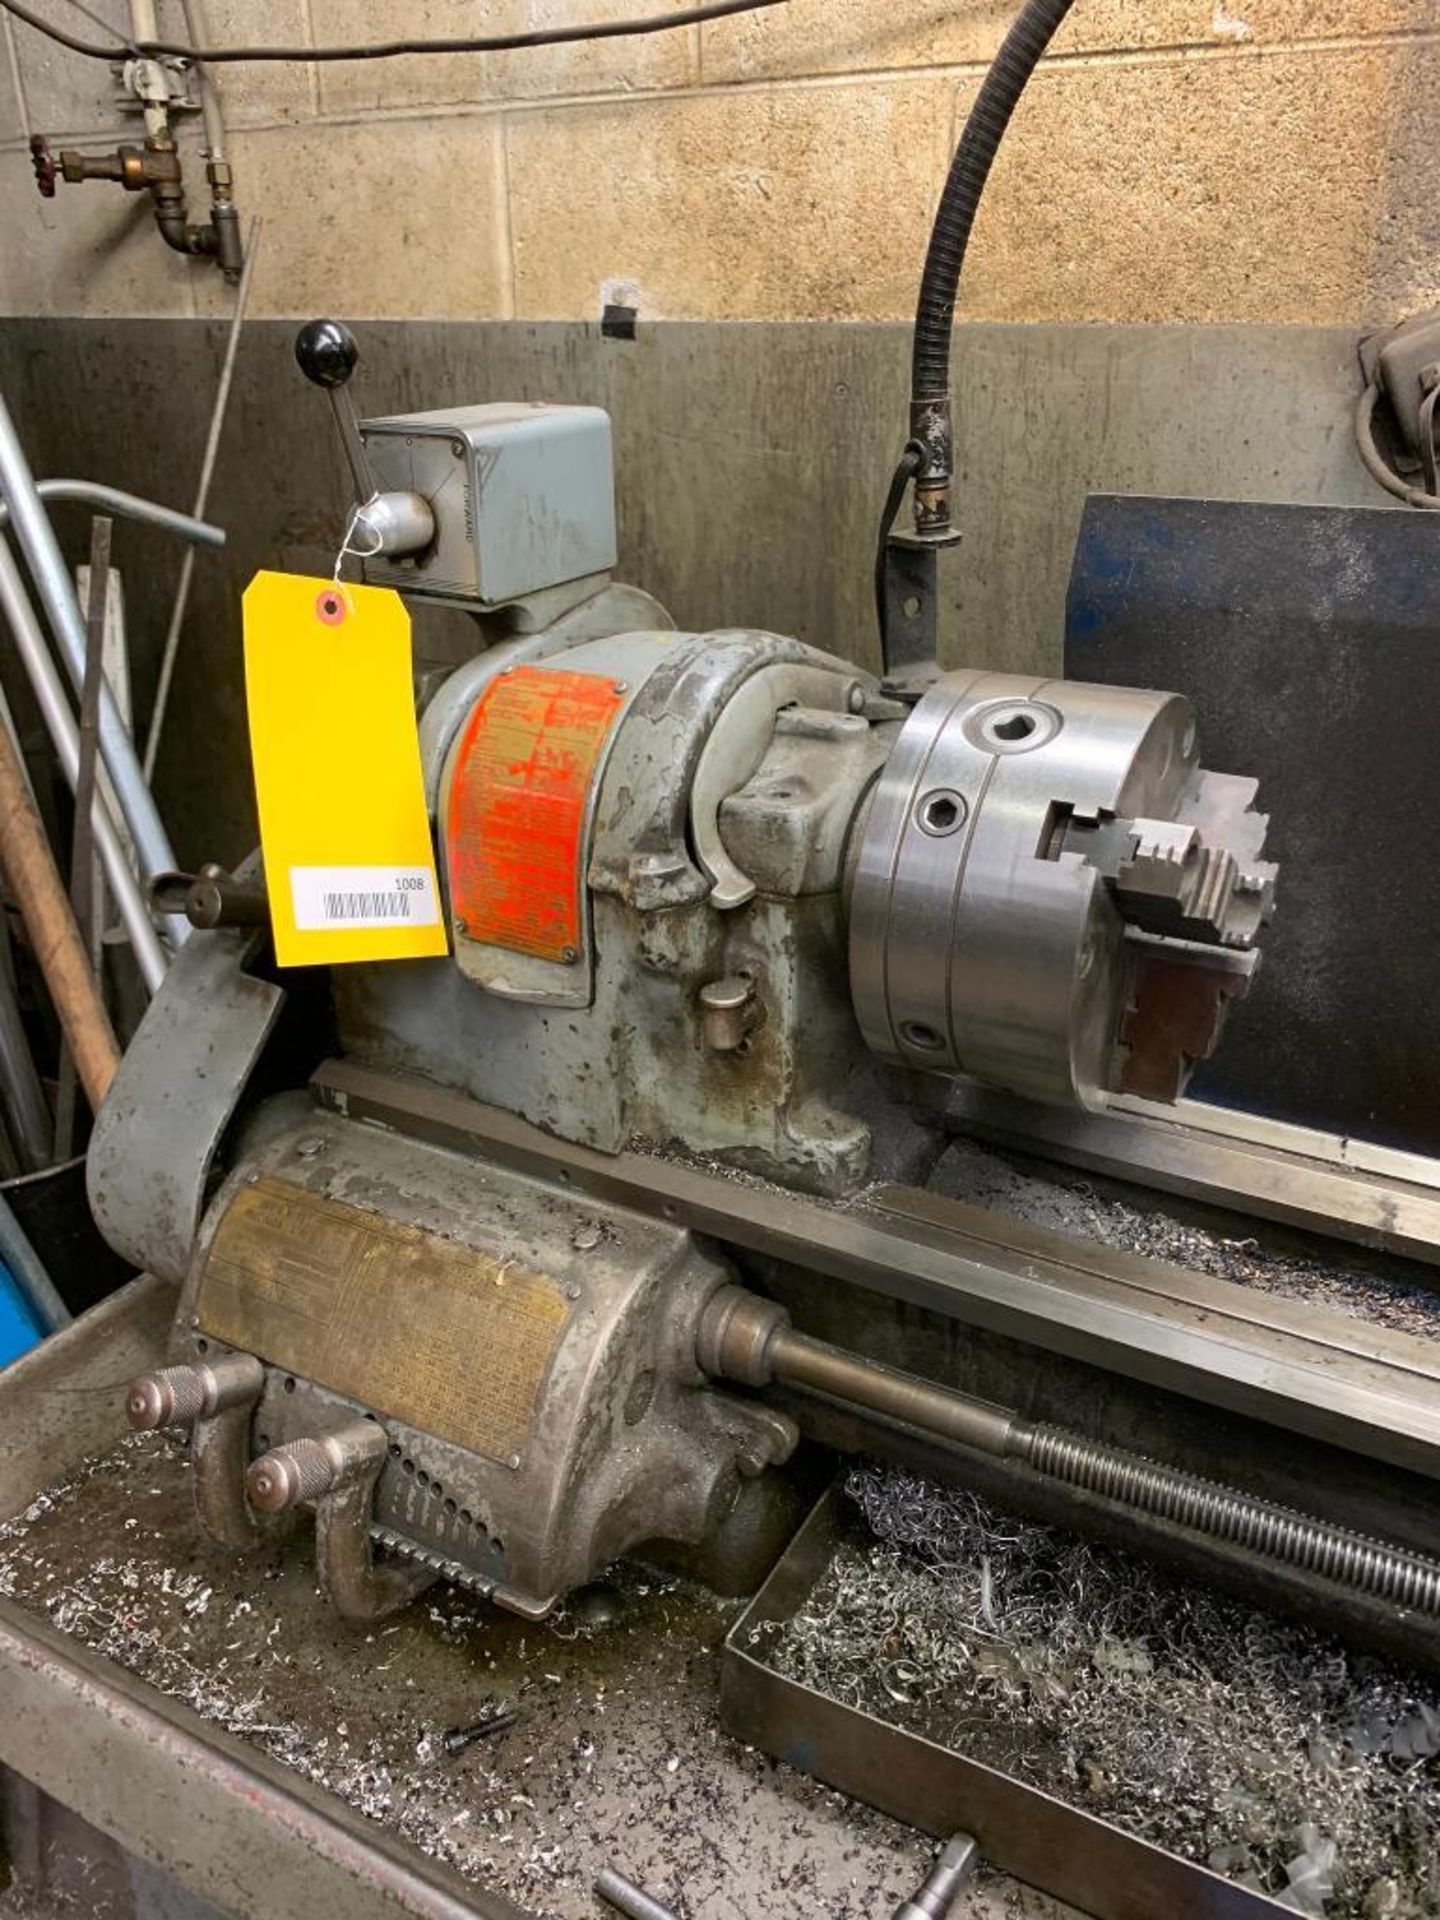 South Bend Precision Lathe, 4-1/2' Bed, 6" 3-Jaw Chuck, Cross-Slide Tailstock w/ Center, S/N CL-187R - Image 3 of 7